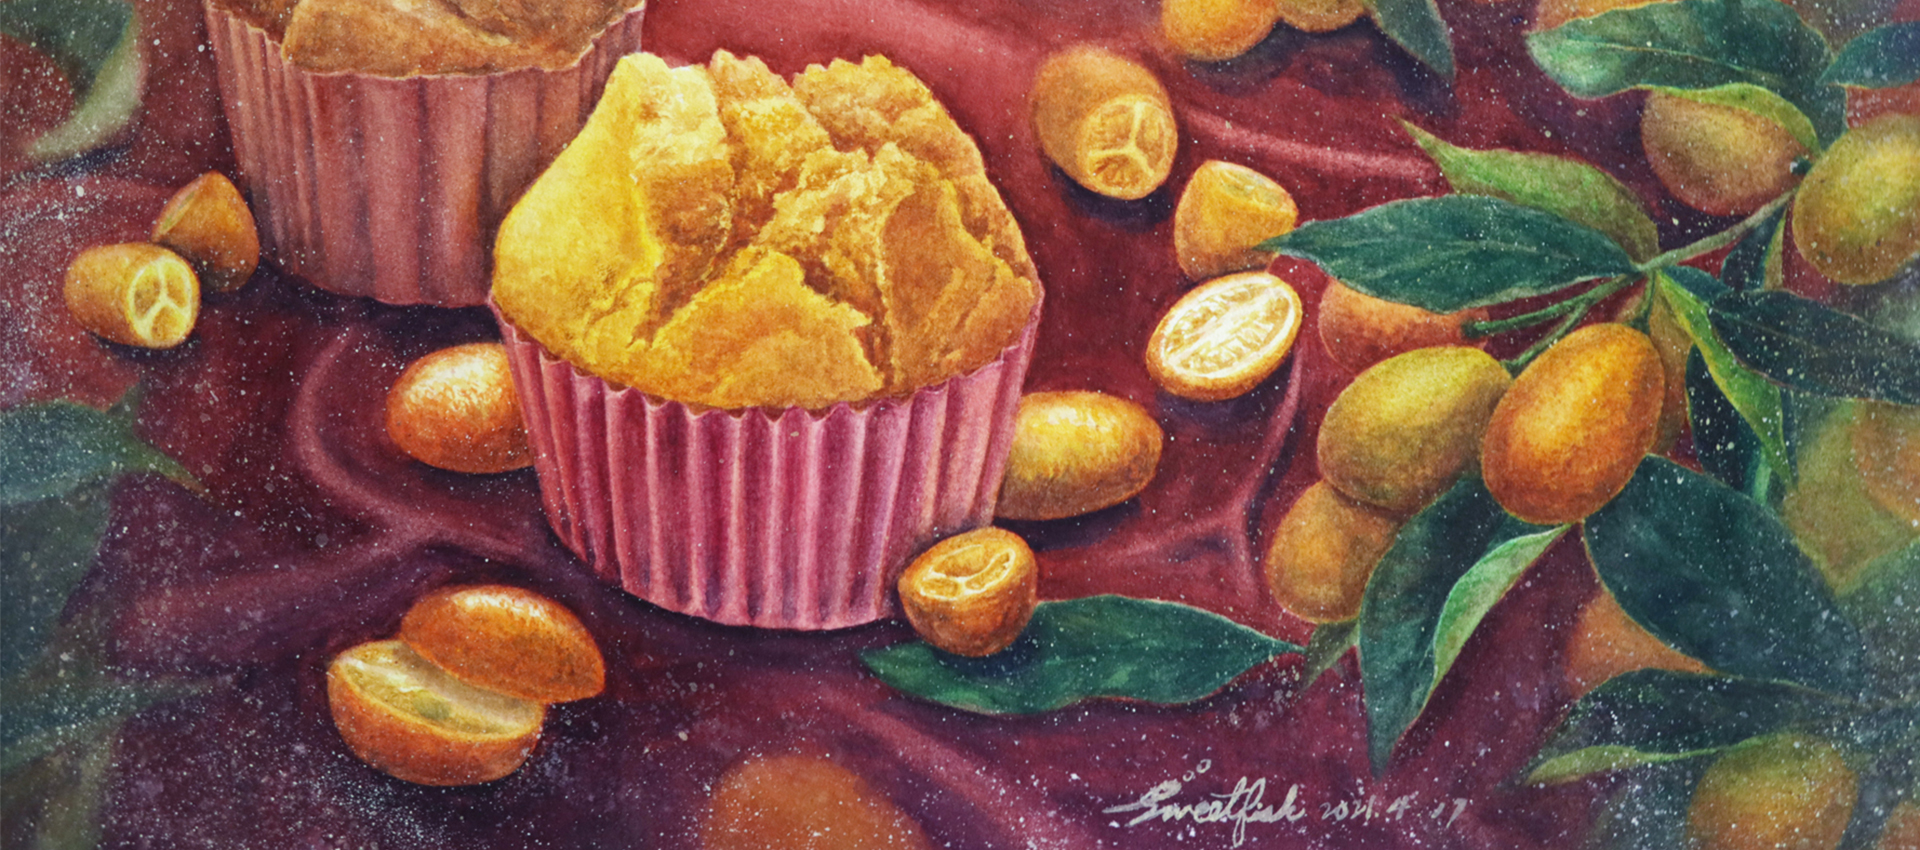 steamed-sponge-cakes-and-kumquats-food-watercolor-painting-by-sweetfish-food-art-